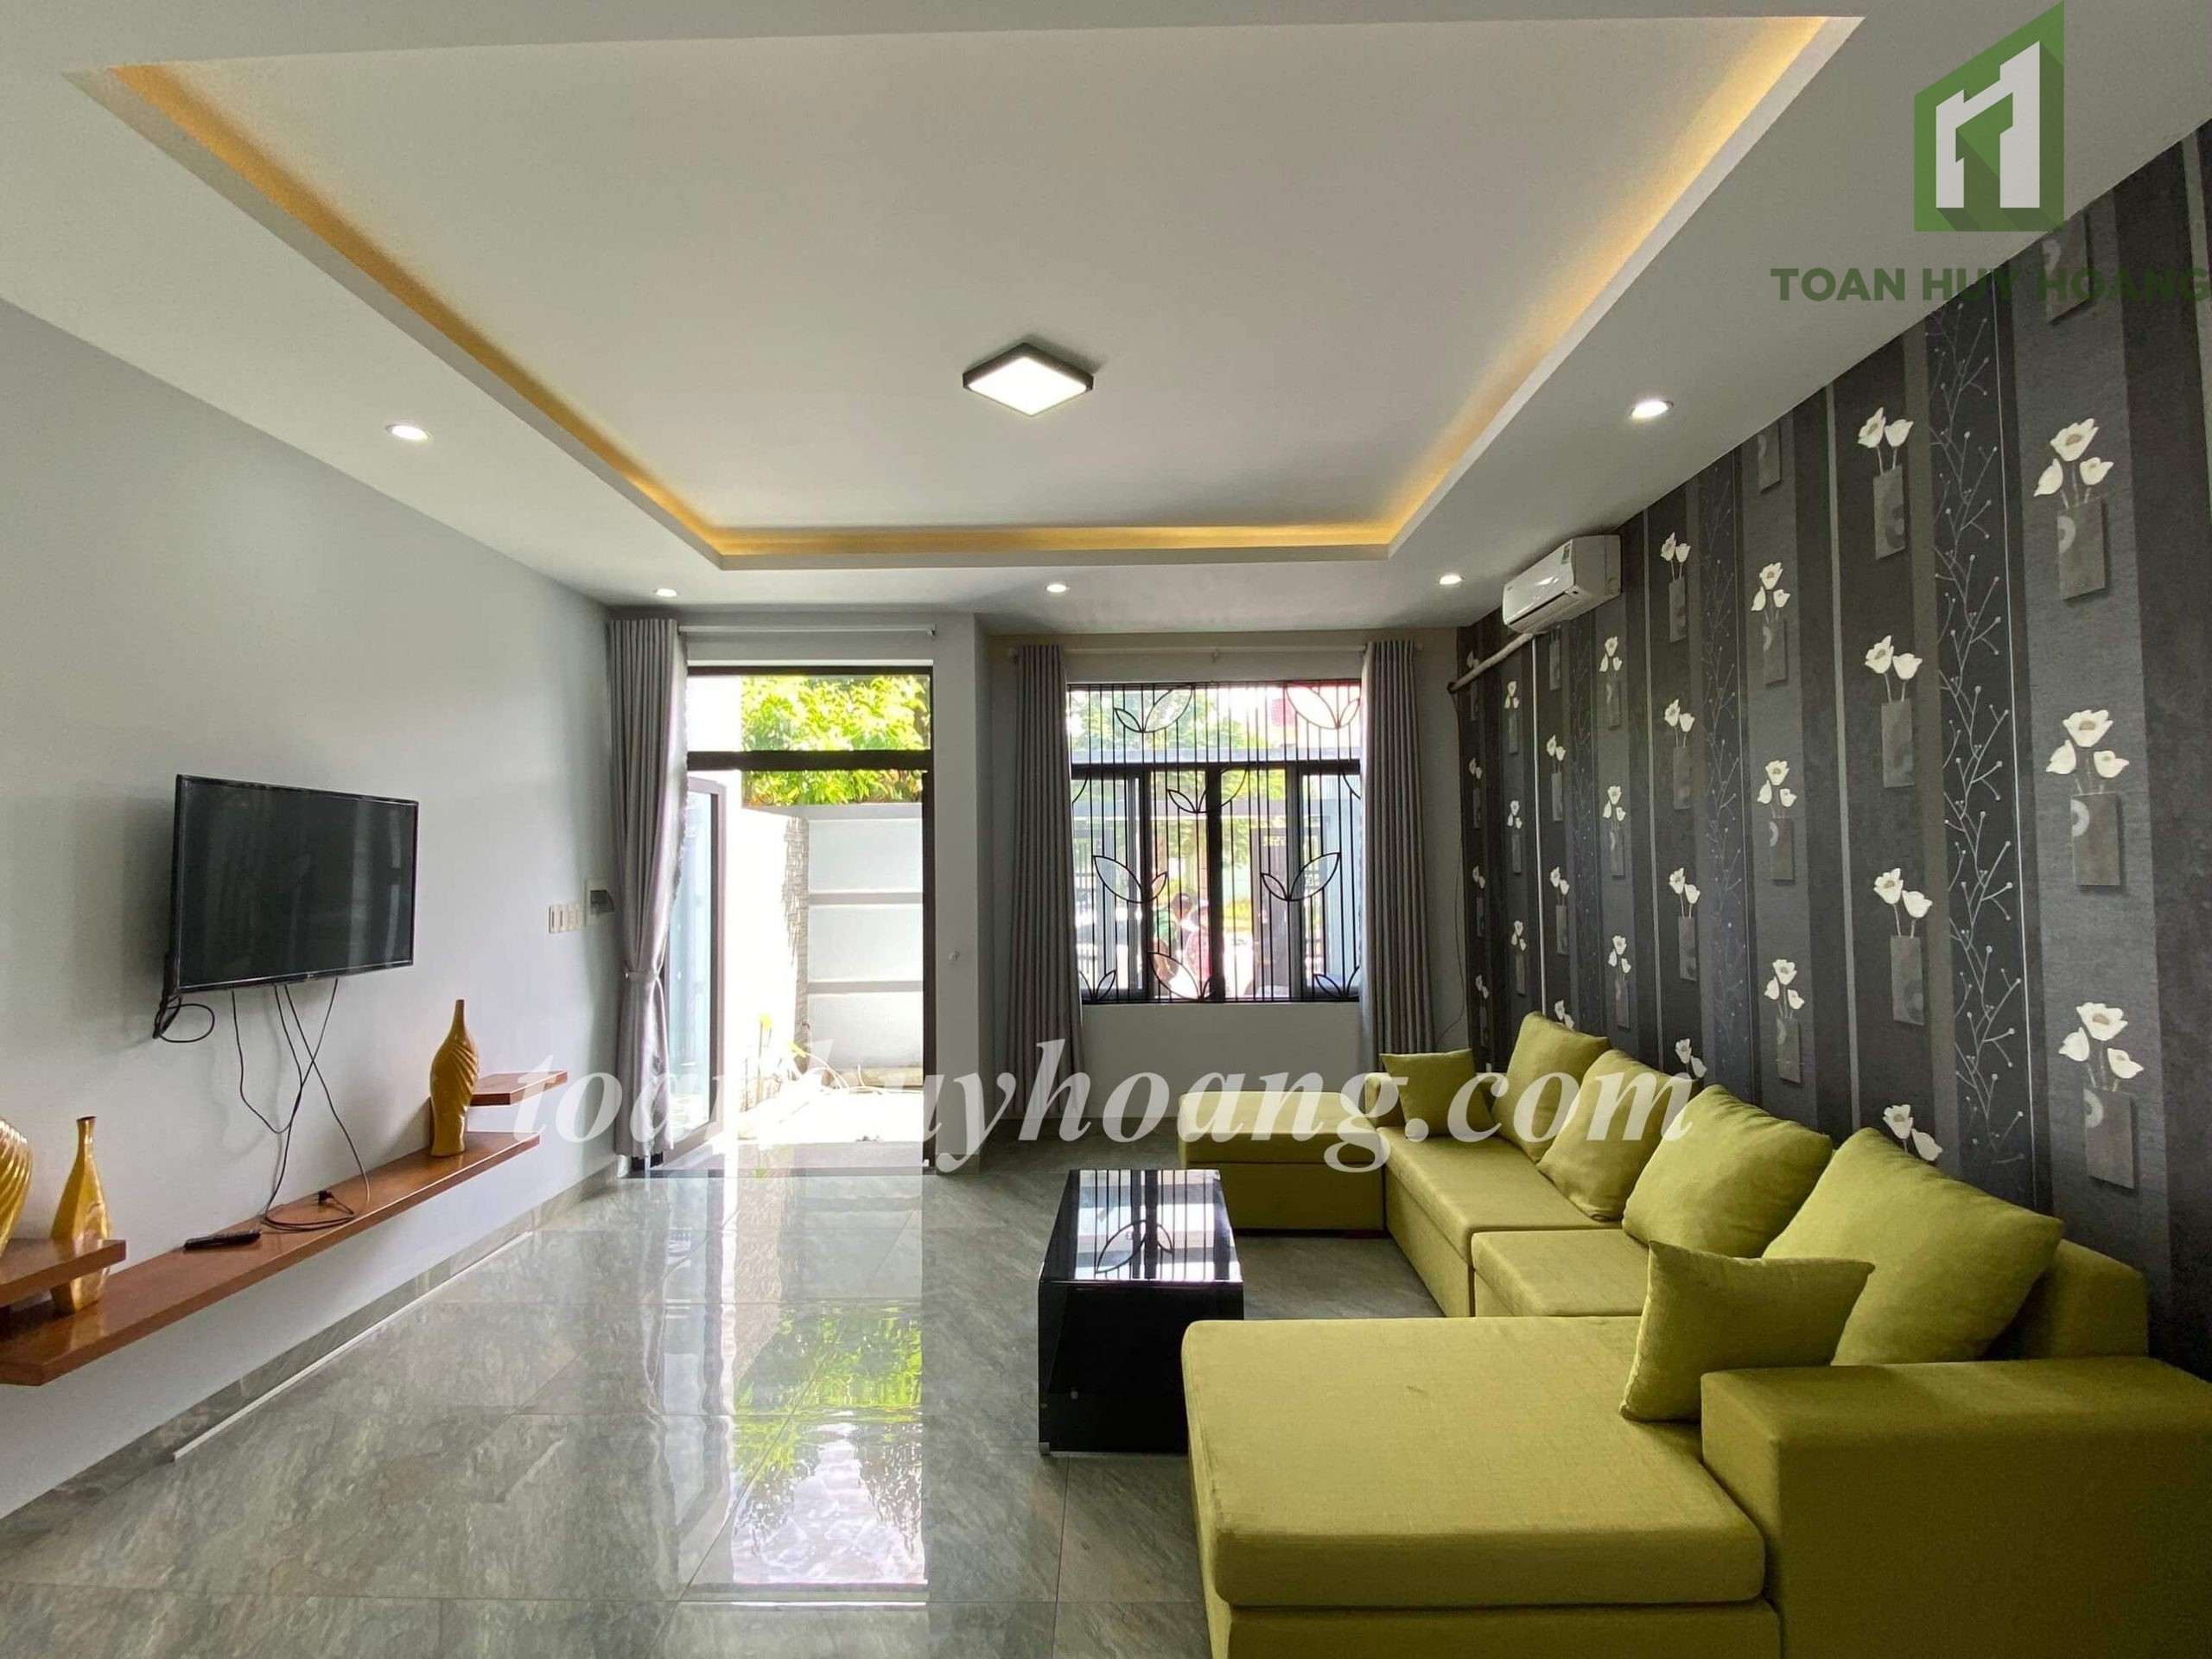 3 bed bright home for rent in nam viet a